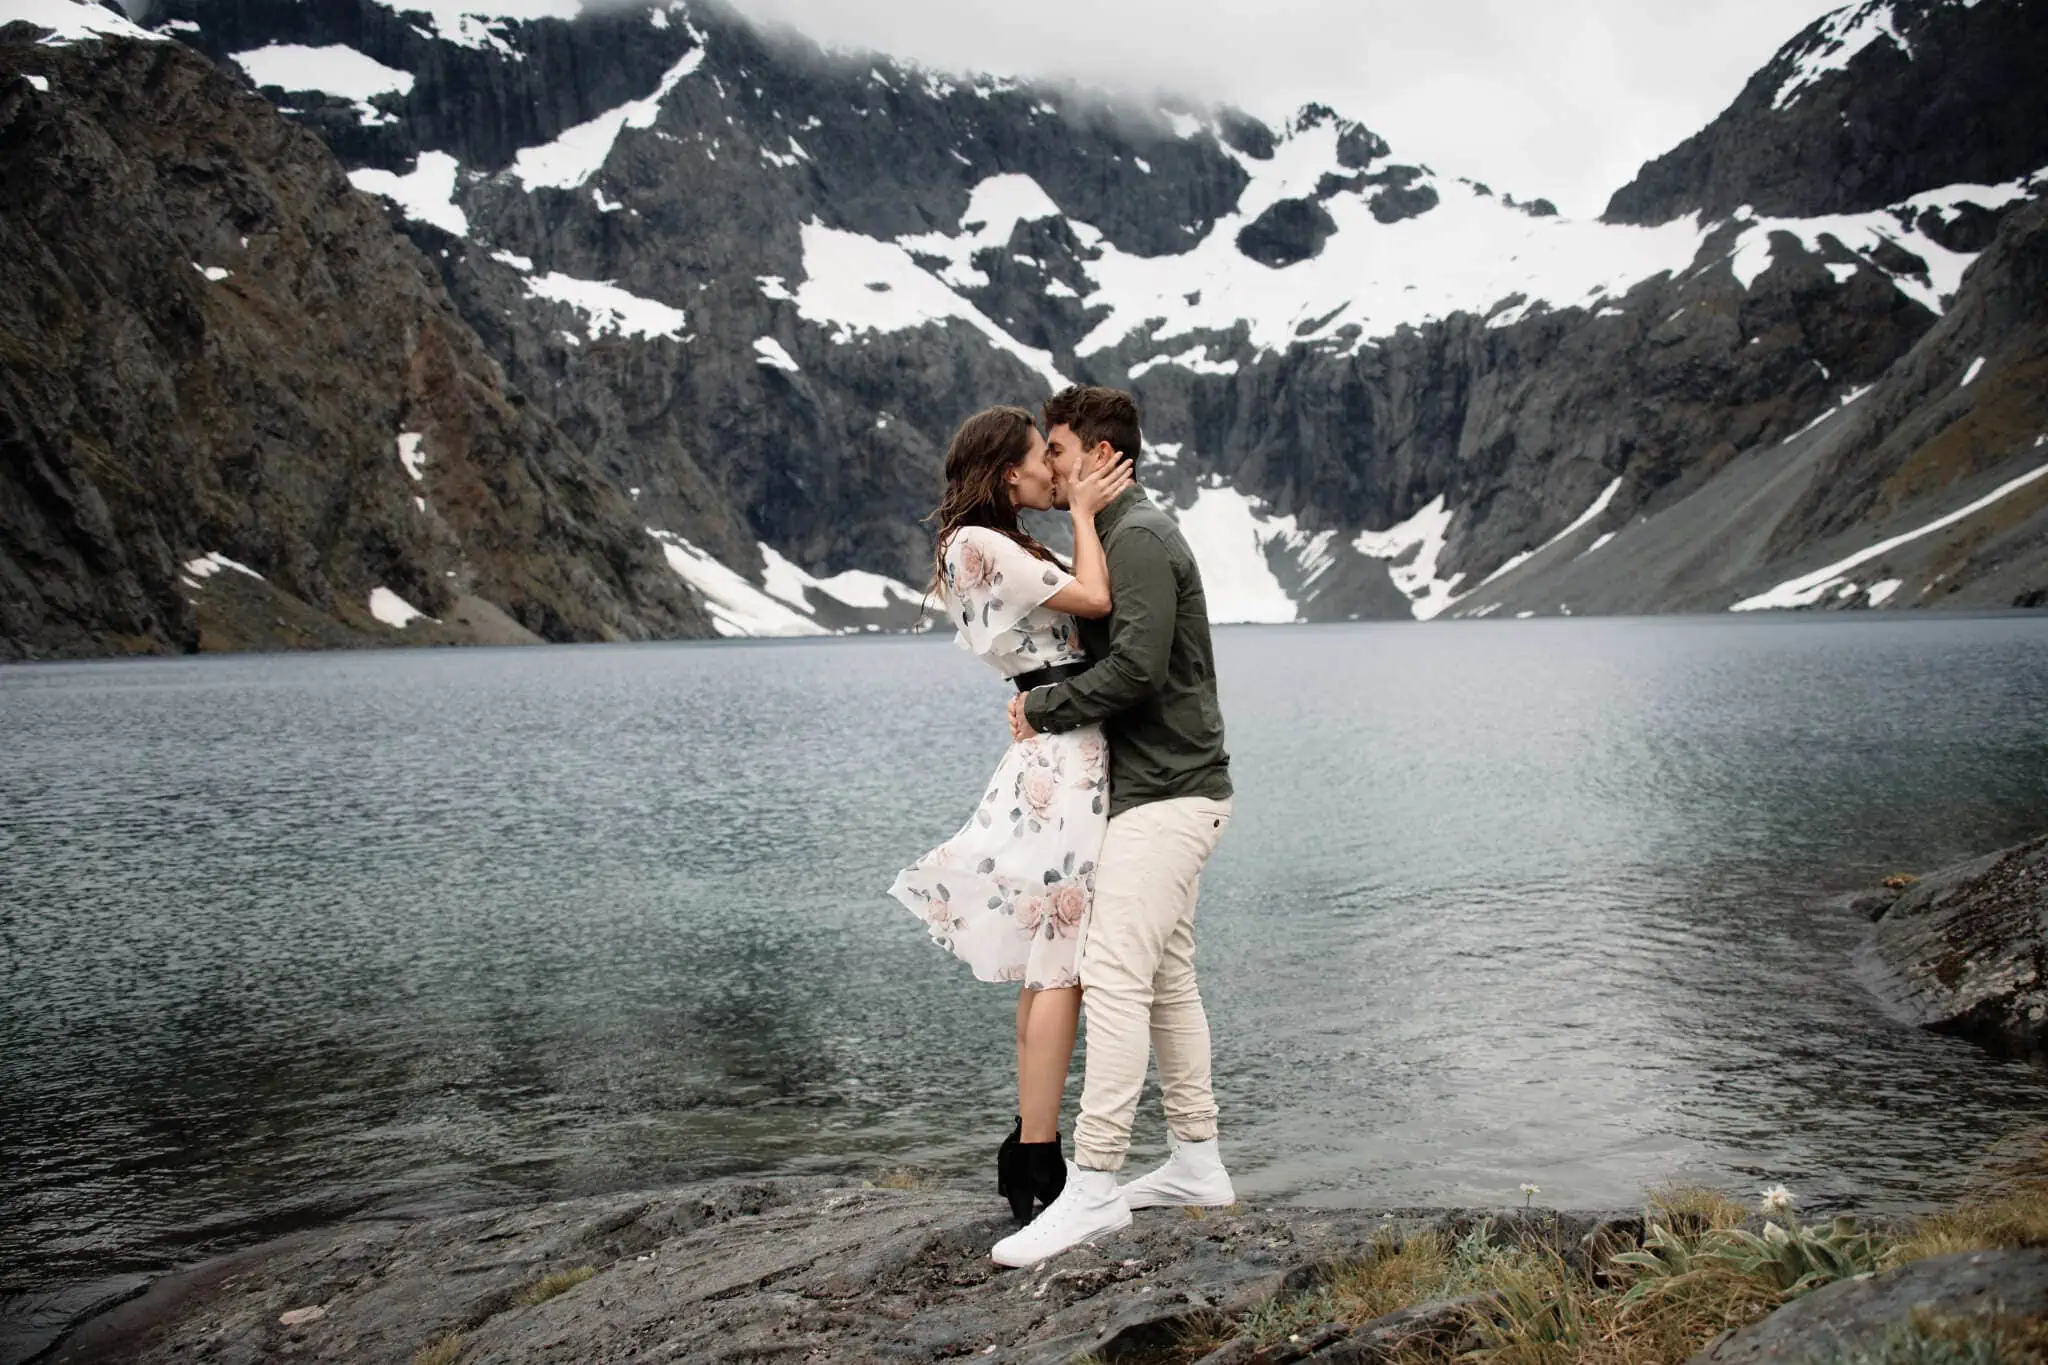 Scott and Hayley kiss in front of a lake with mountains in the background.